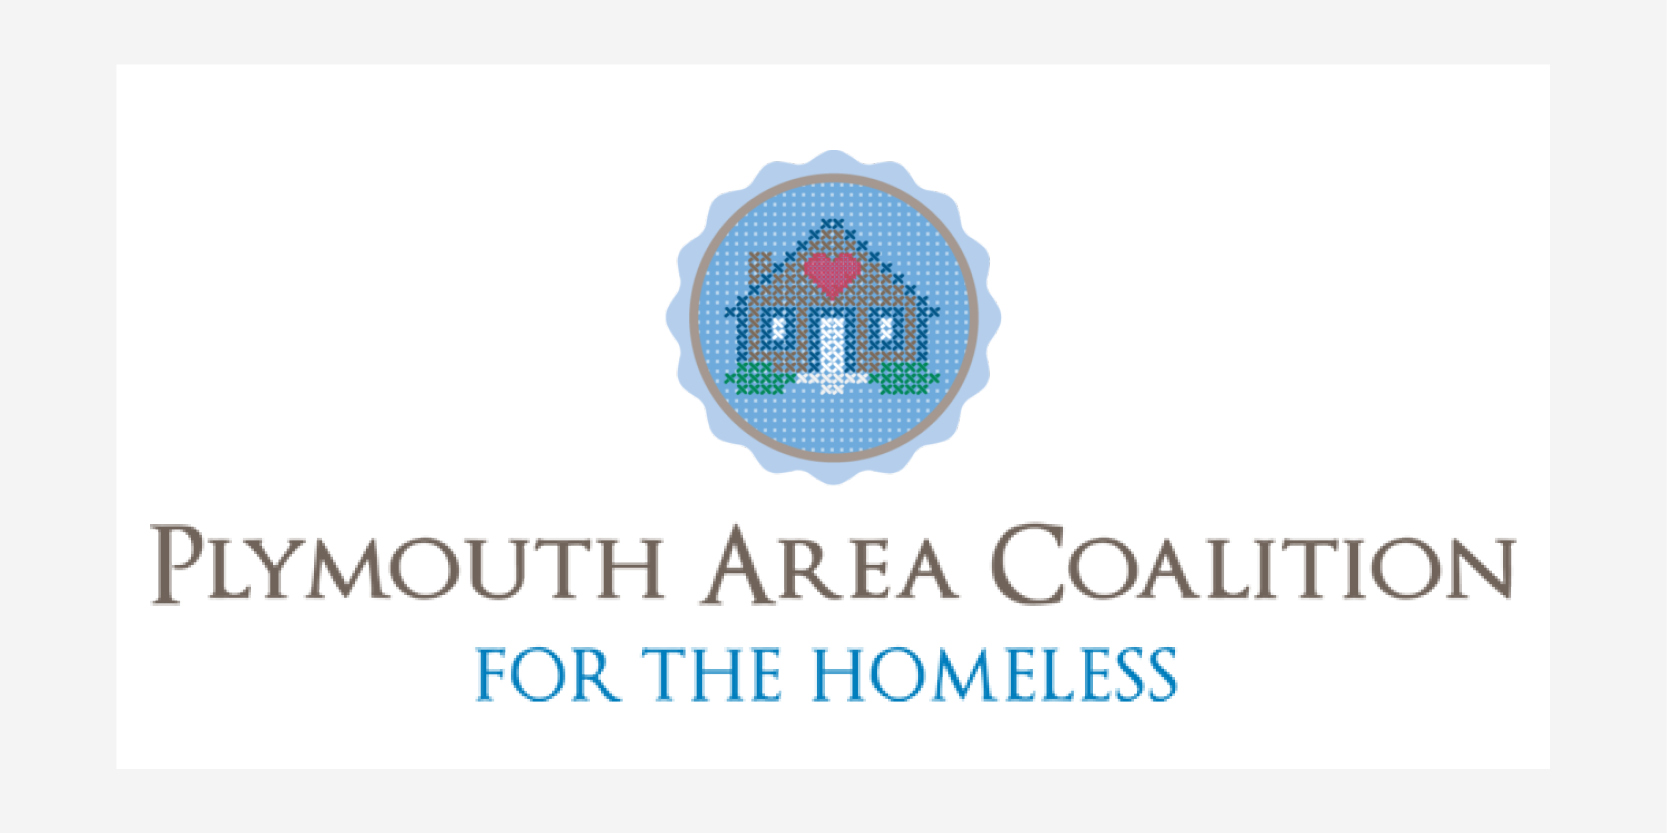 Plymouth Area Coalition for the Homeless logo